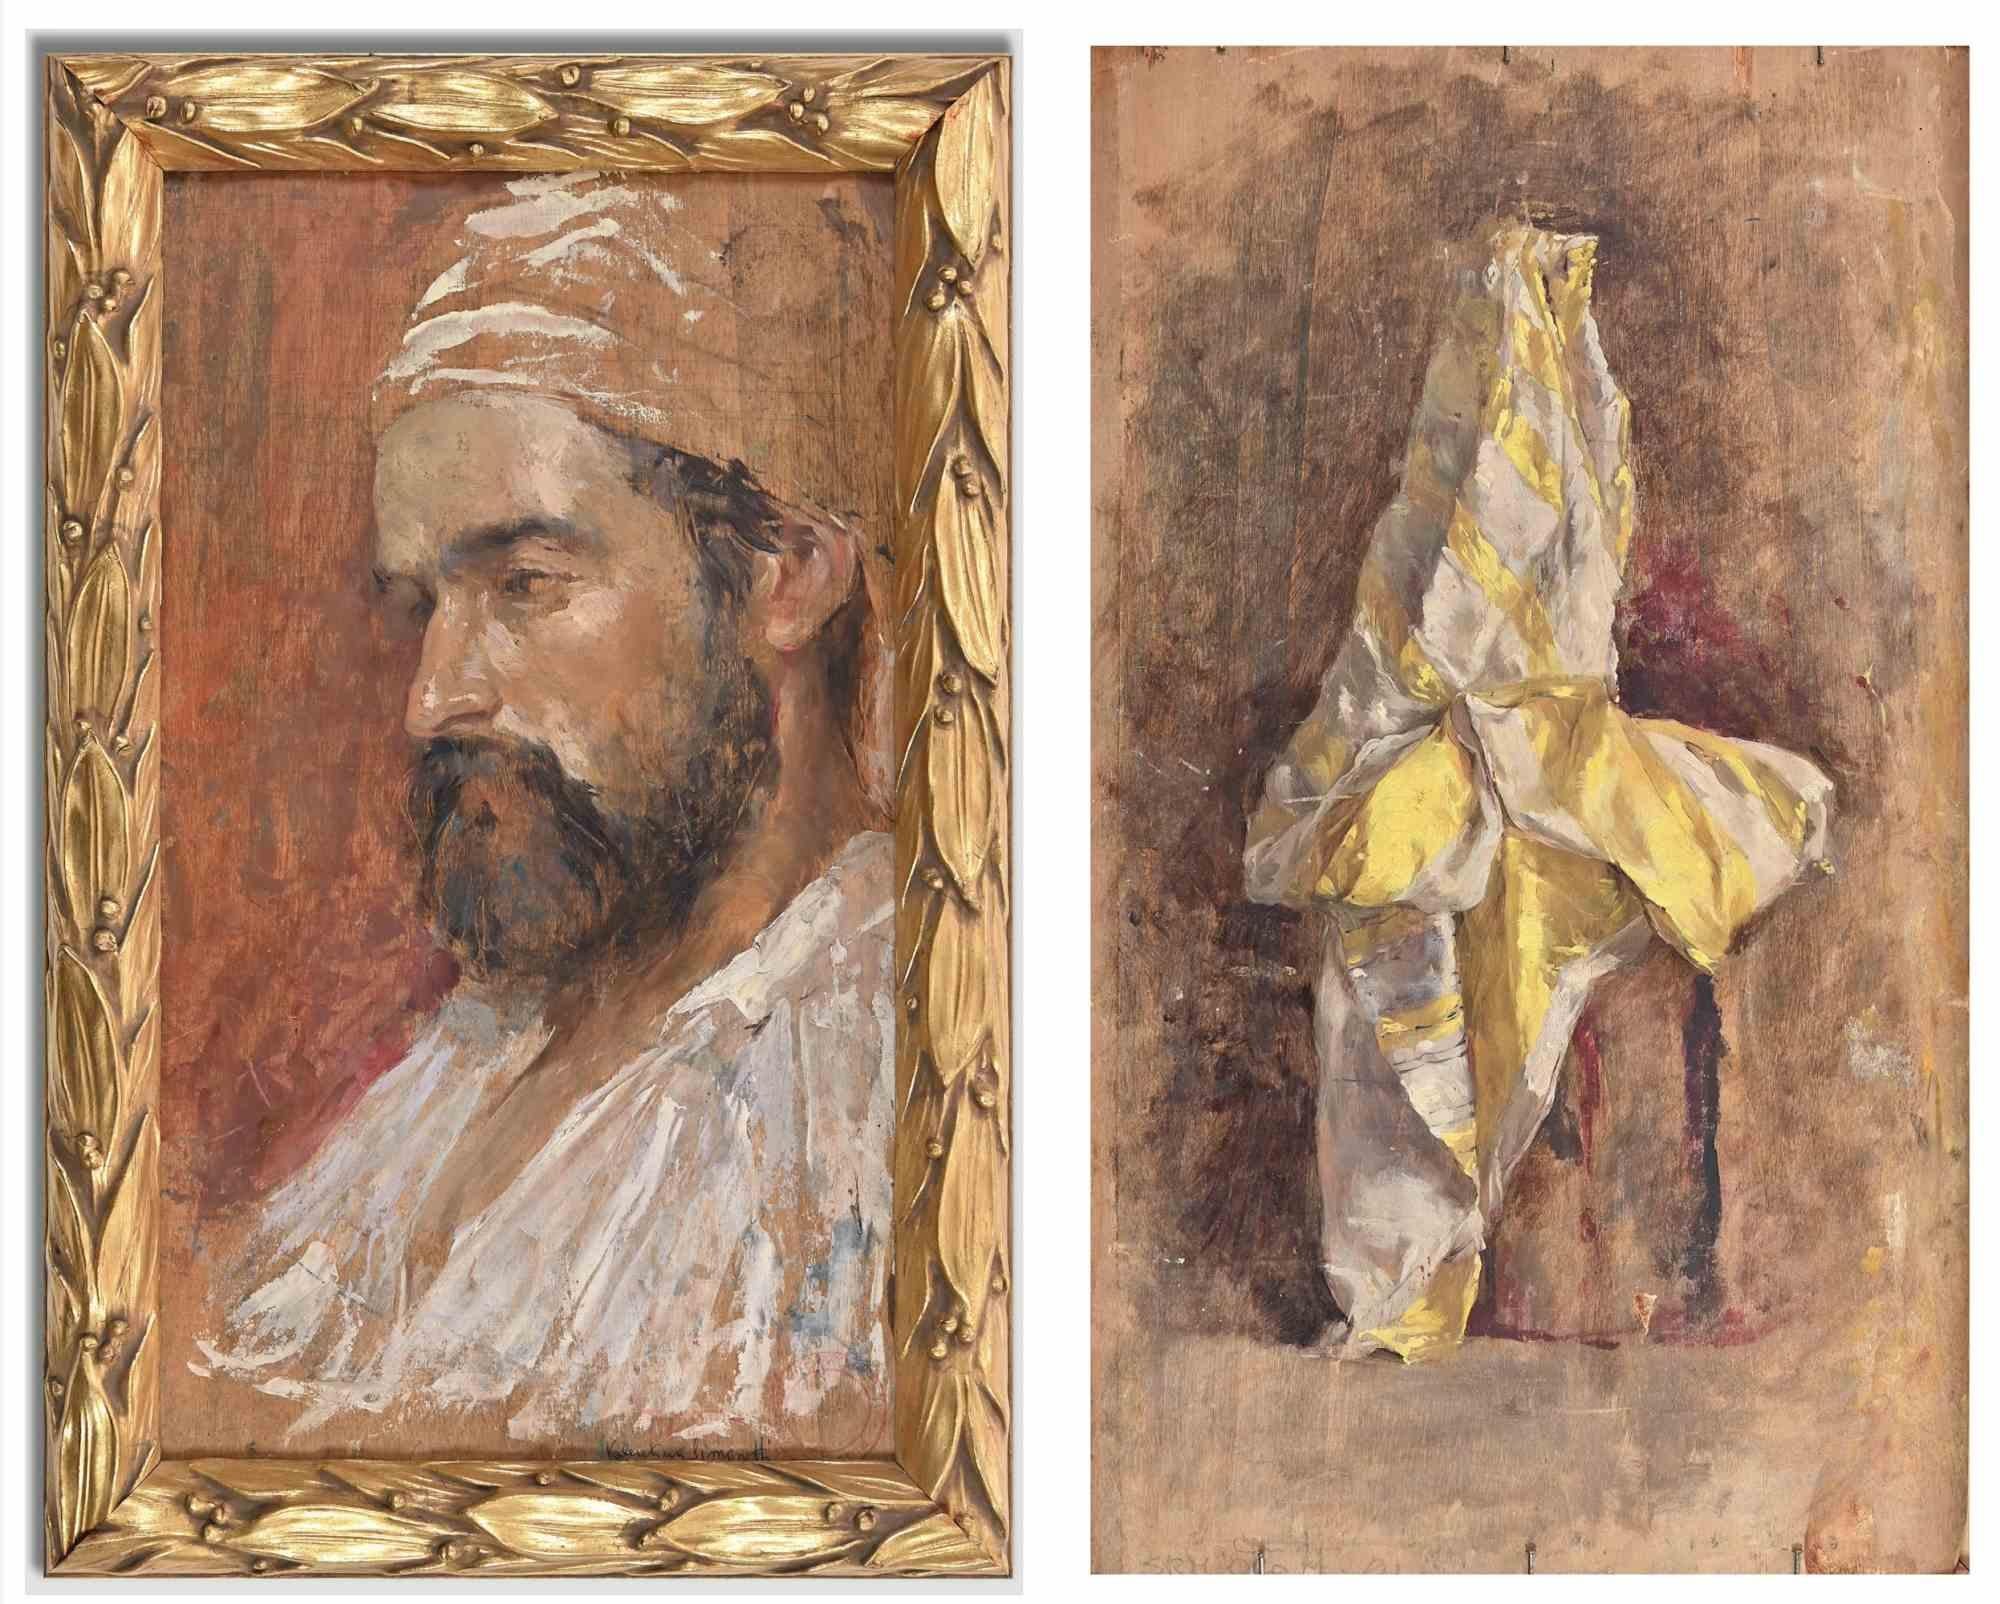 Amedeo Momo Simonetti Portrait Painting - Two Orientalist Subjects -Oil on Panel by A. Momo Simonetti - Early 20th Century